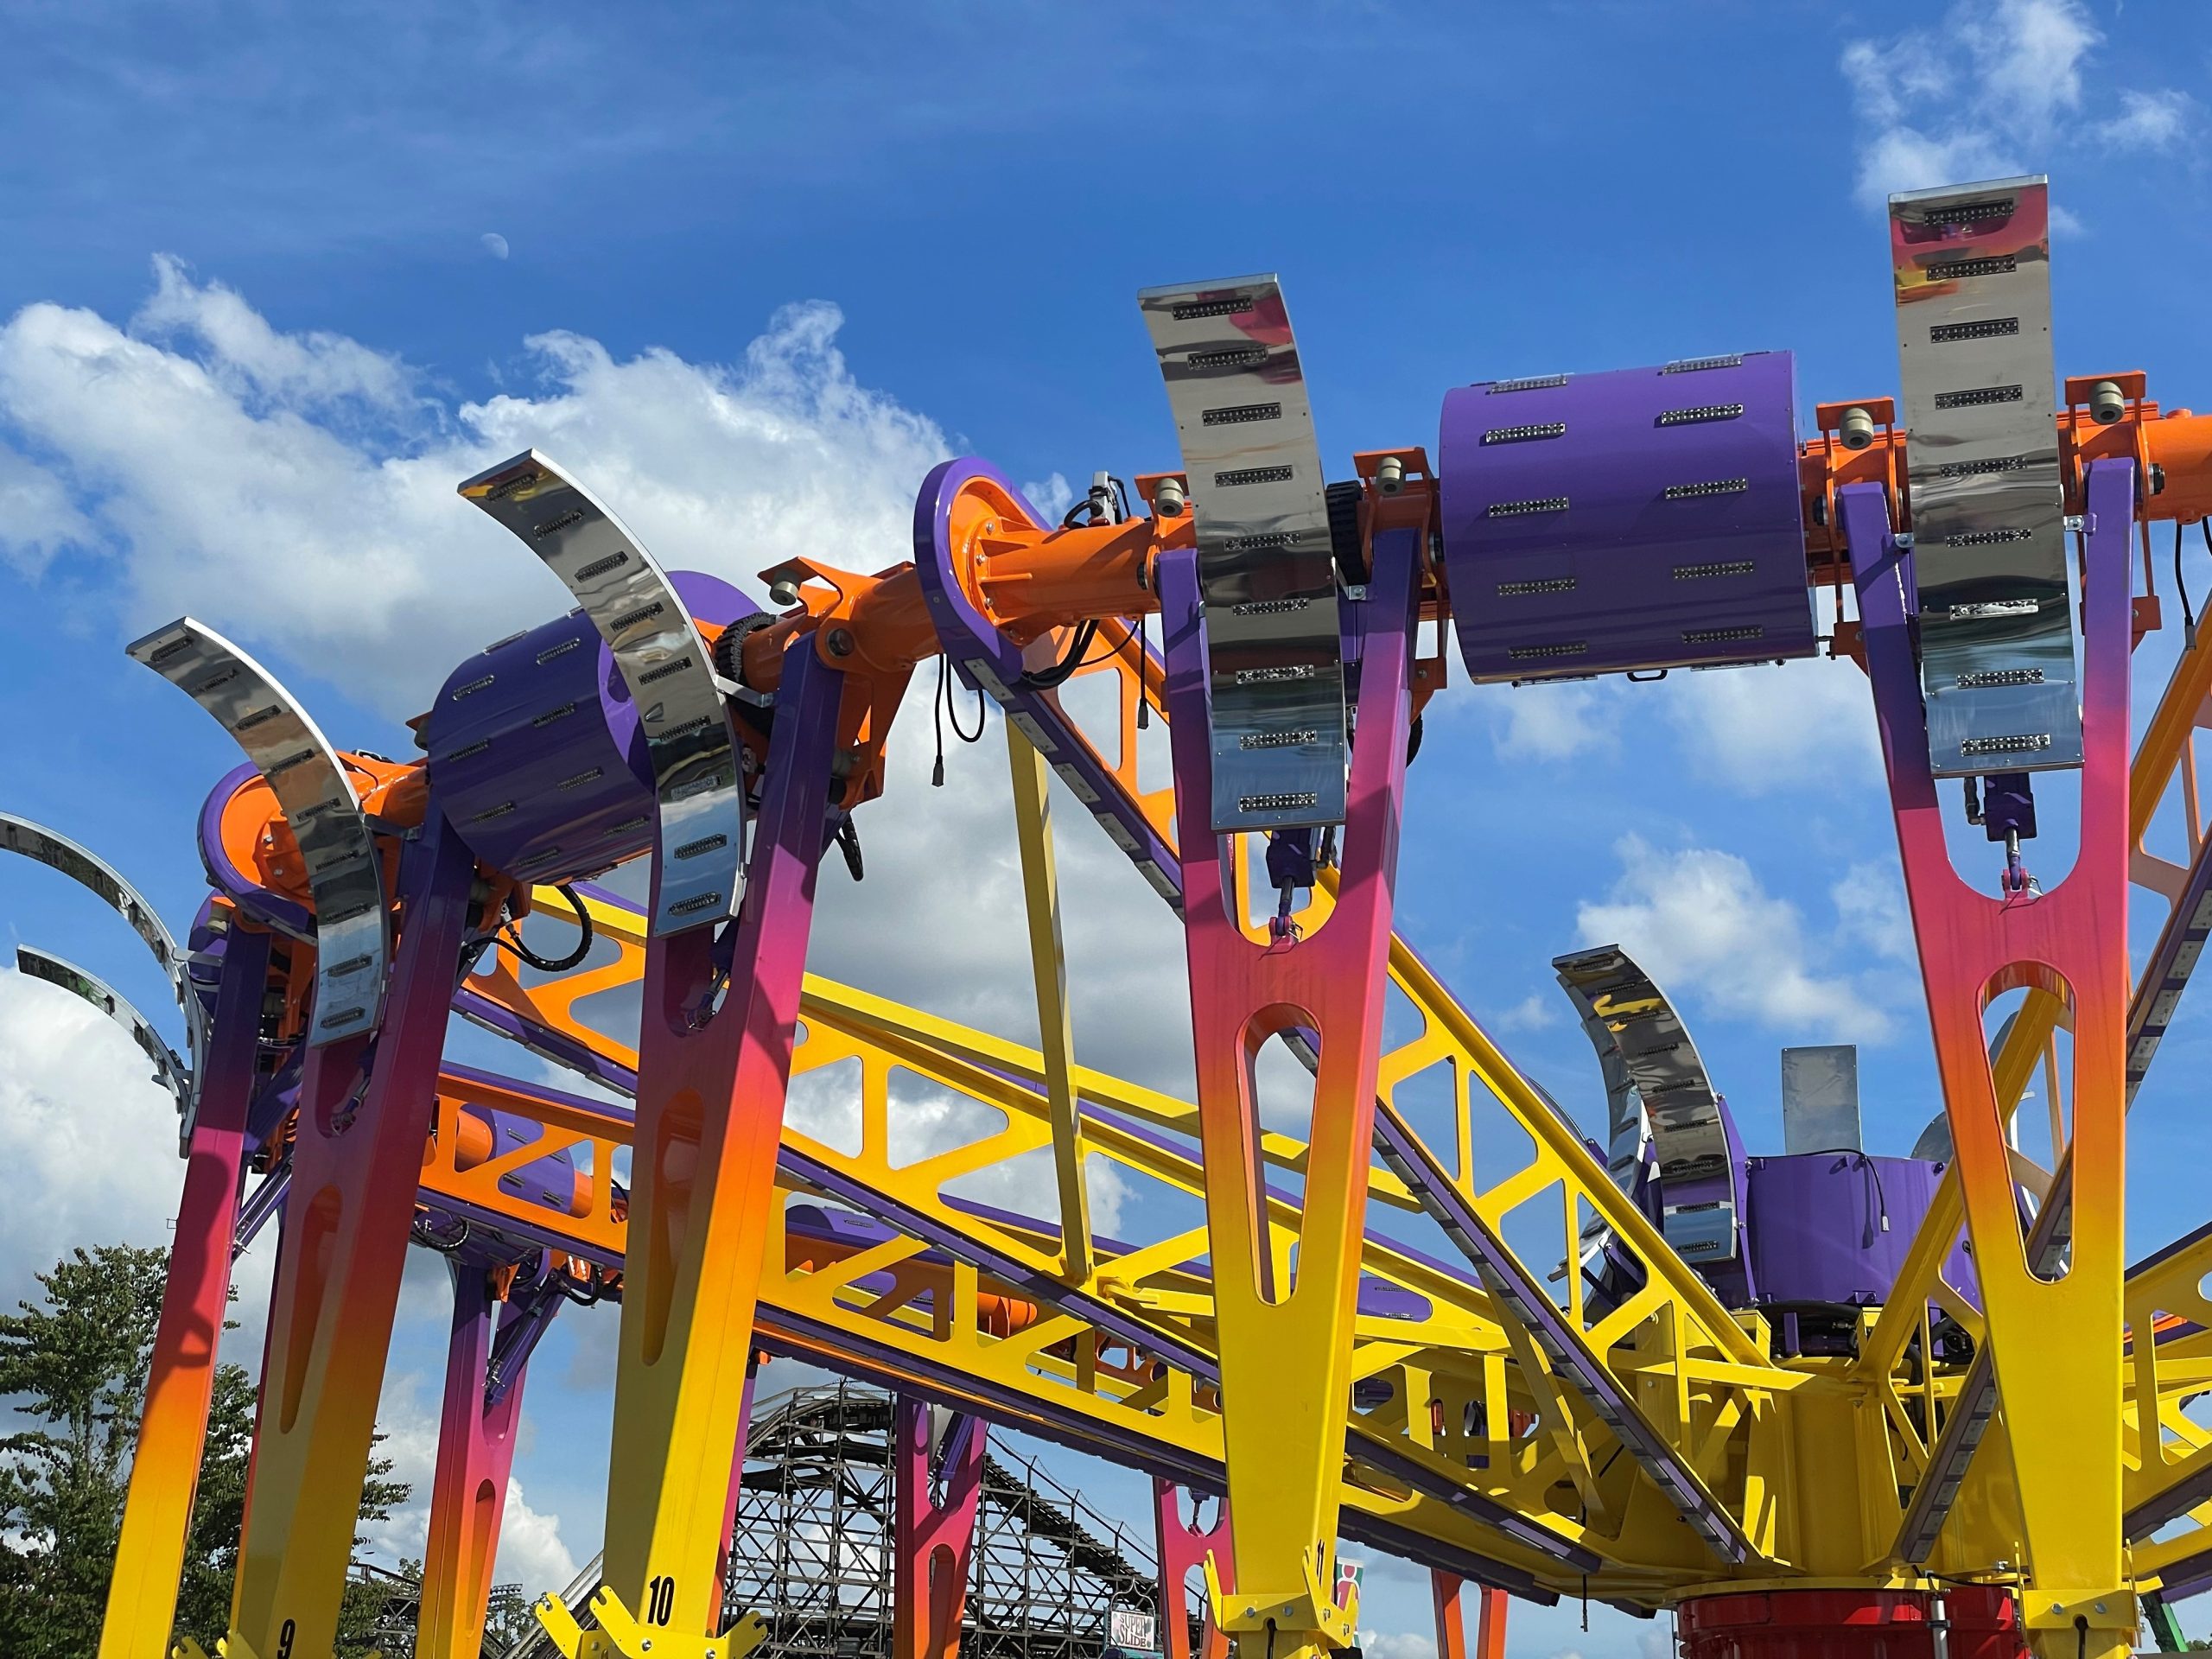 Skybender in Playland, opening July 2022